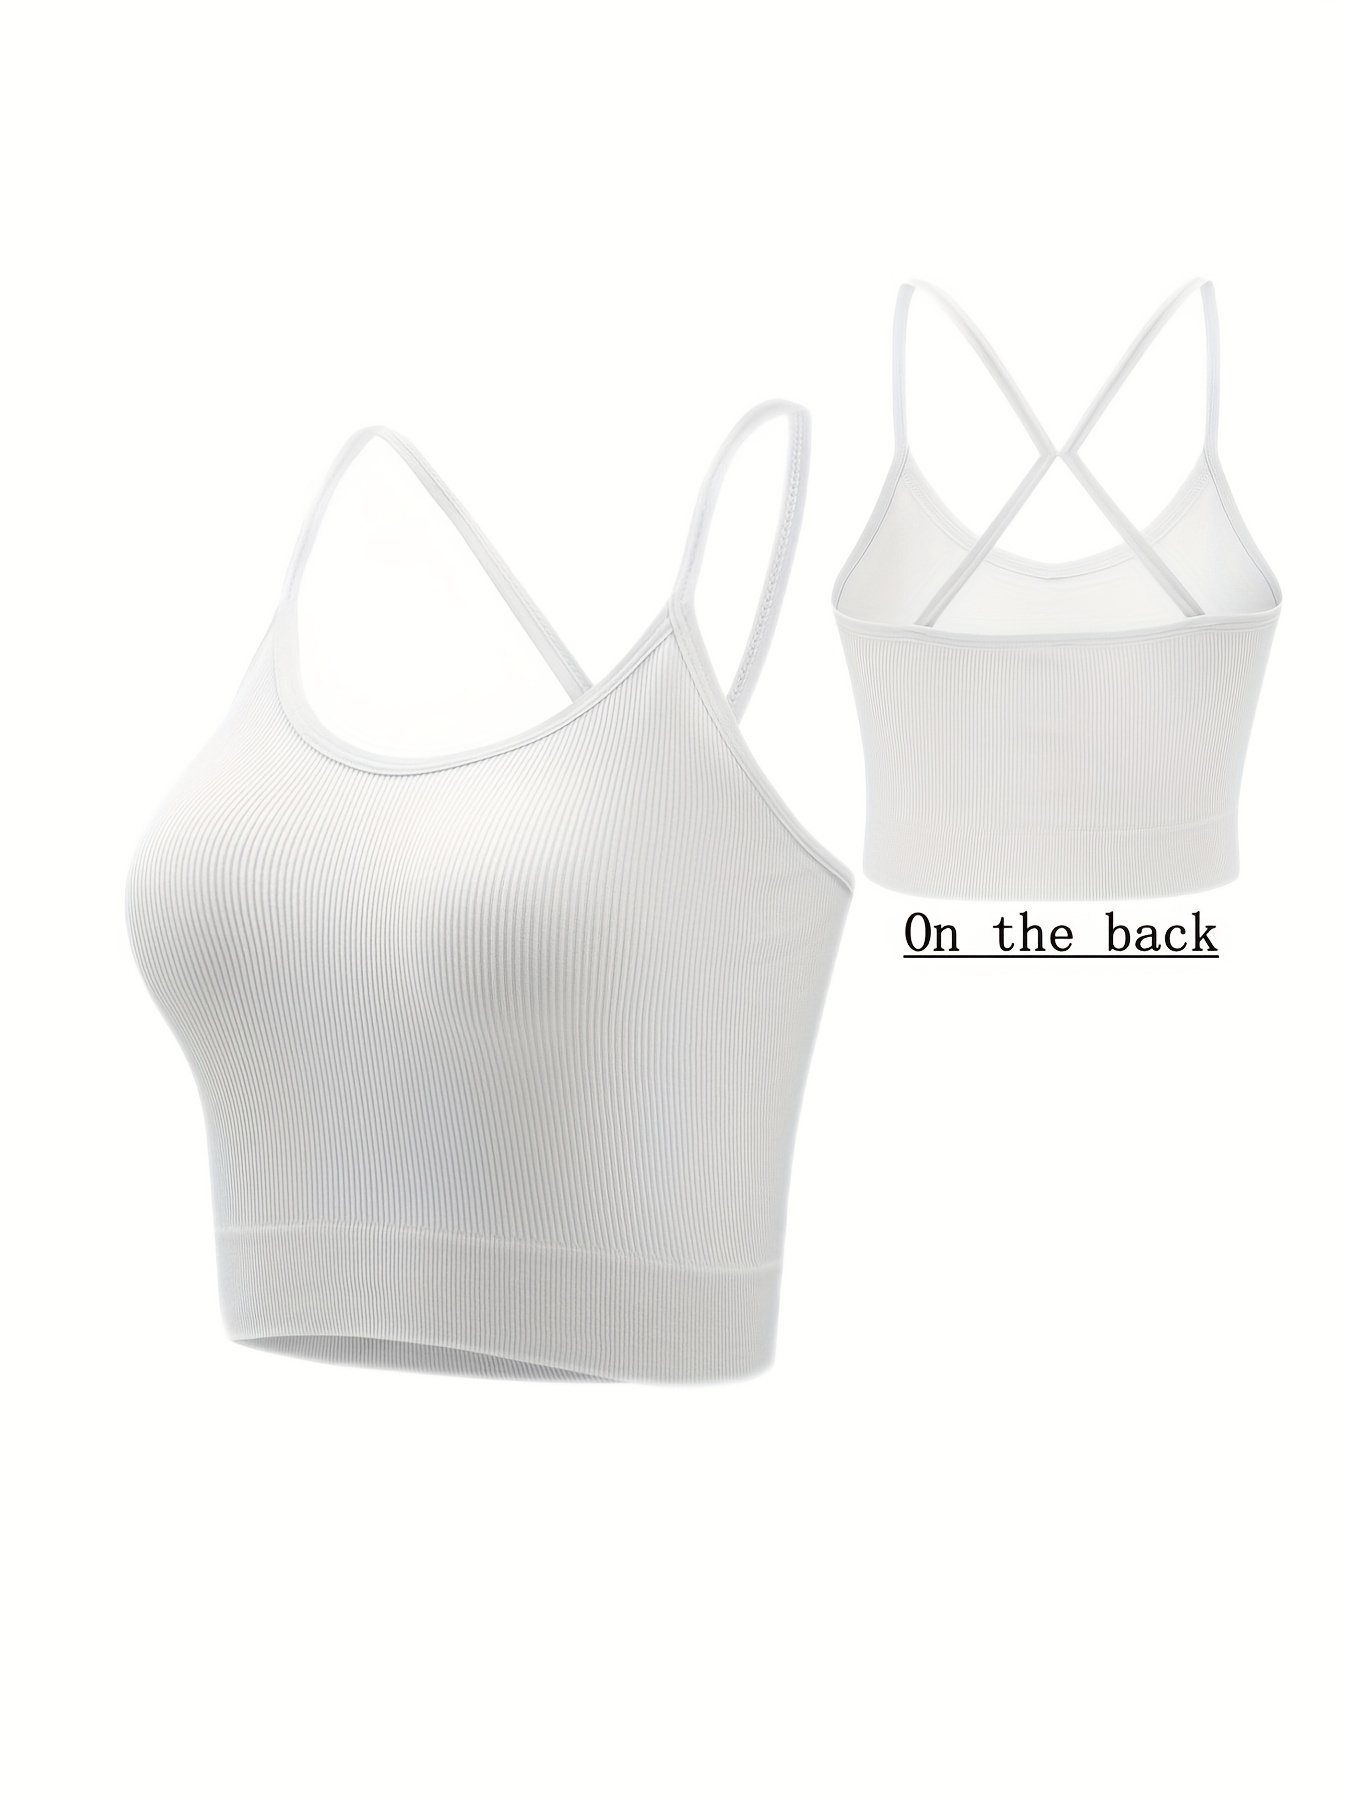 4pcs Ribbed Wireless Cami Tops, Breathable Cross Back No Padding Cami Top,  Women's Lingerie & Underwear